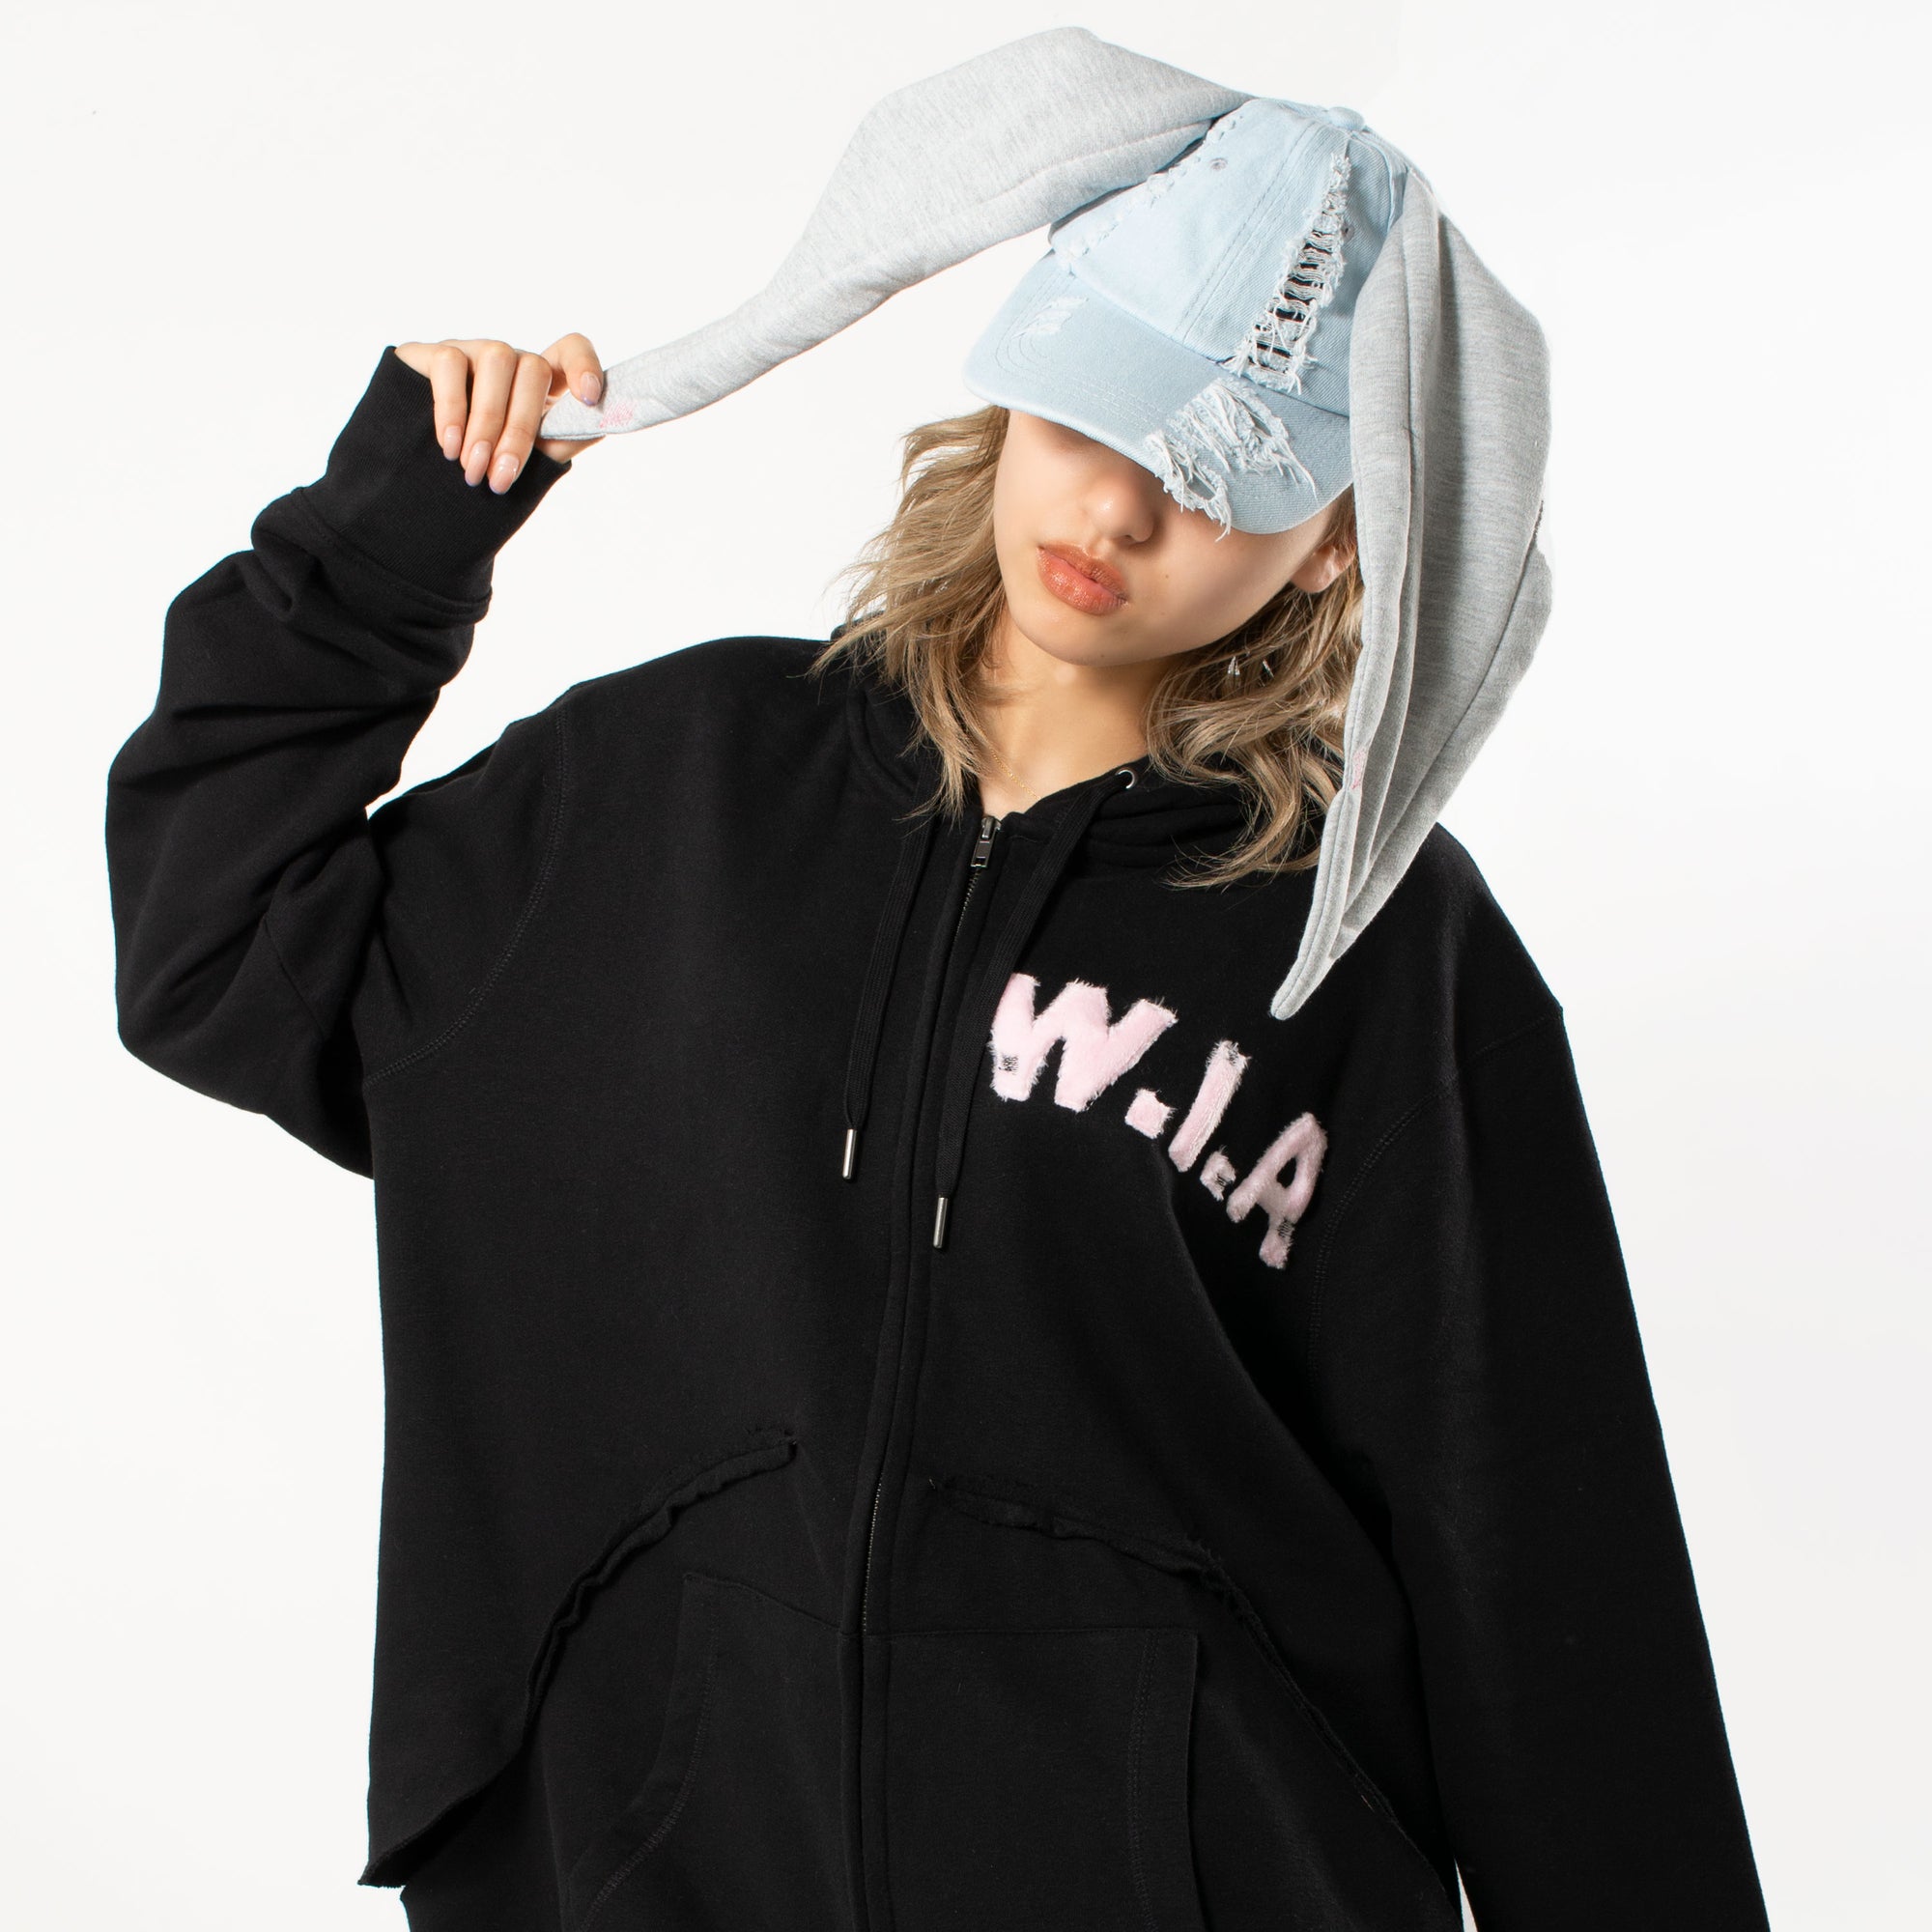 W.I.A<br>SS23 COLLECTION